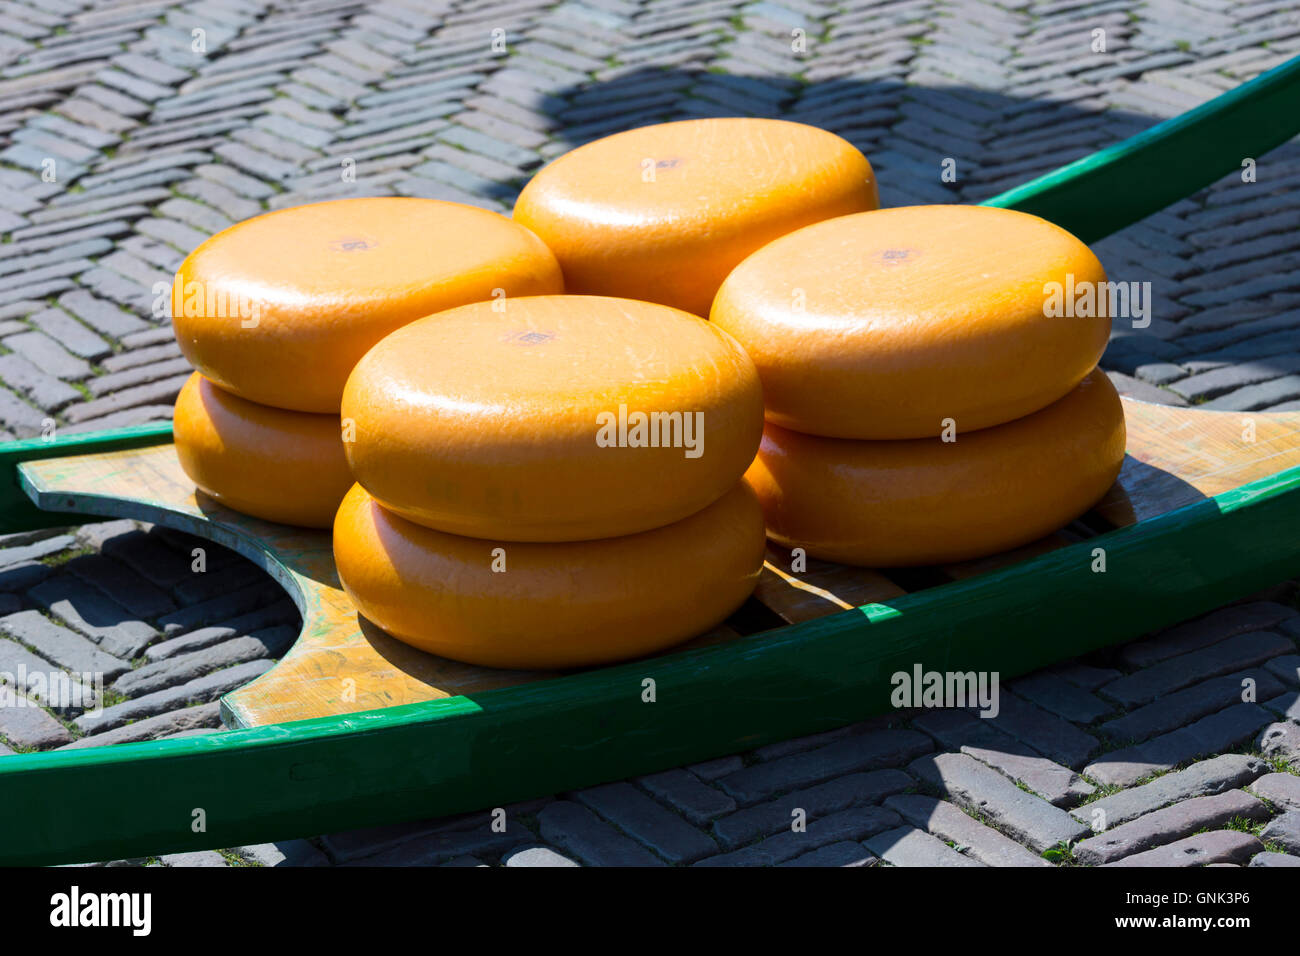 Wheels / rounds of Gouda cheese on sled / stretcher at Waagplein Square, Alkmaar cheese market, The Netherlands Stock Photo